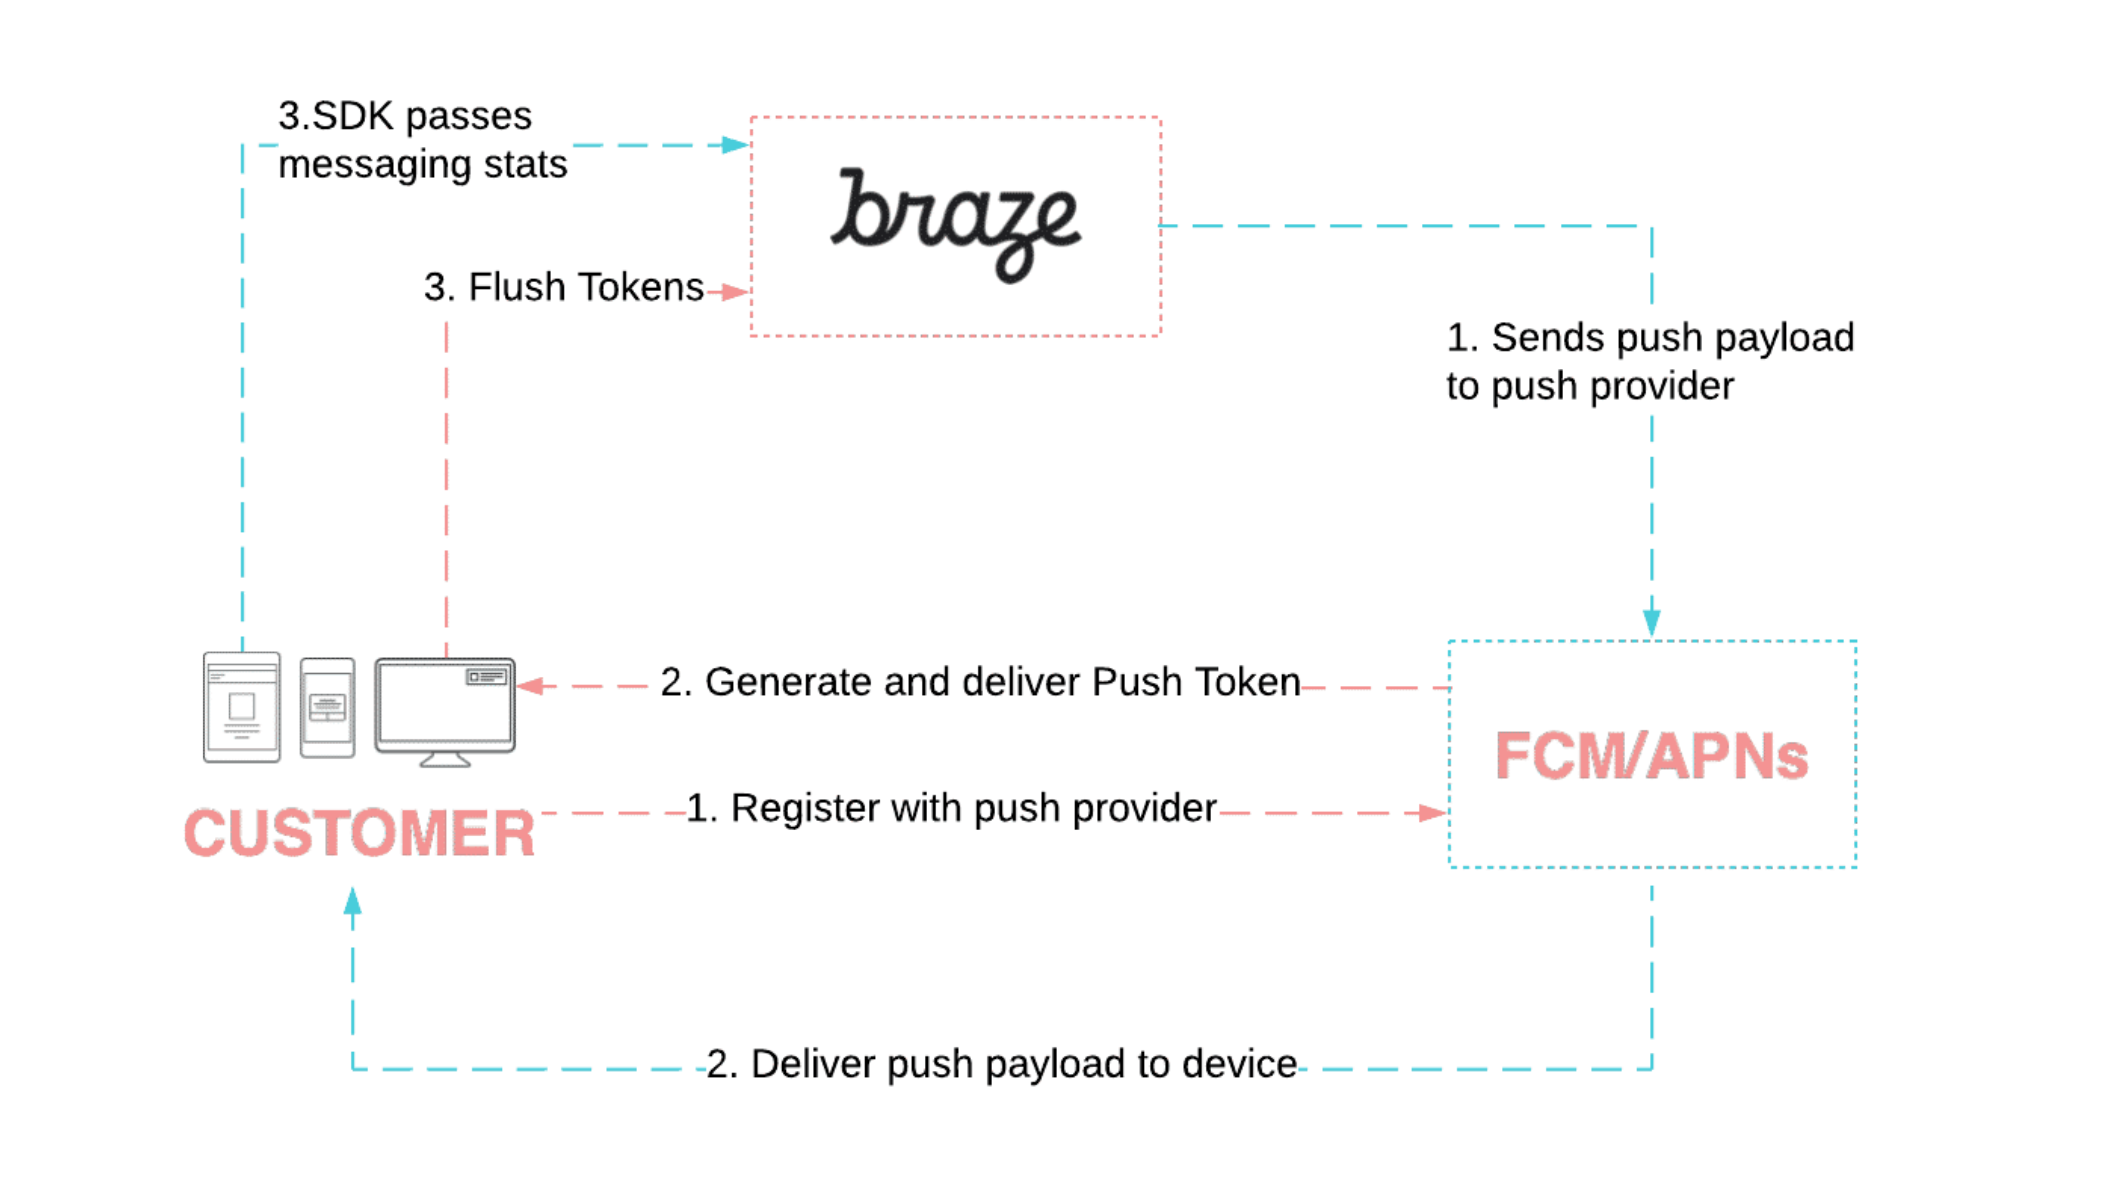 A flow chart that maps the aforementioned push process between Braze, the customer, and Apple Push Notification Service or Firebase Cloud Messaging.